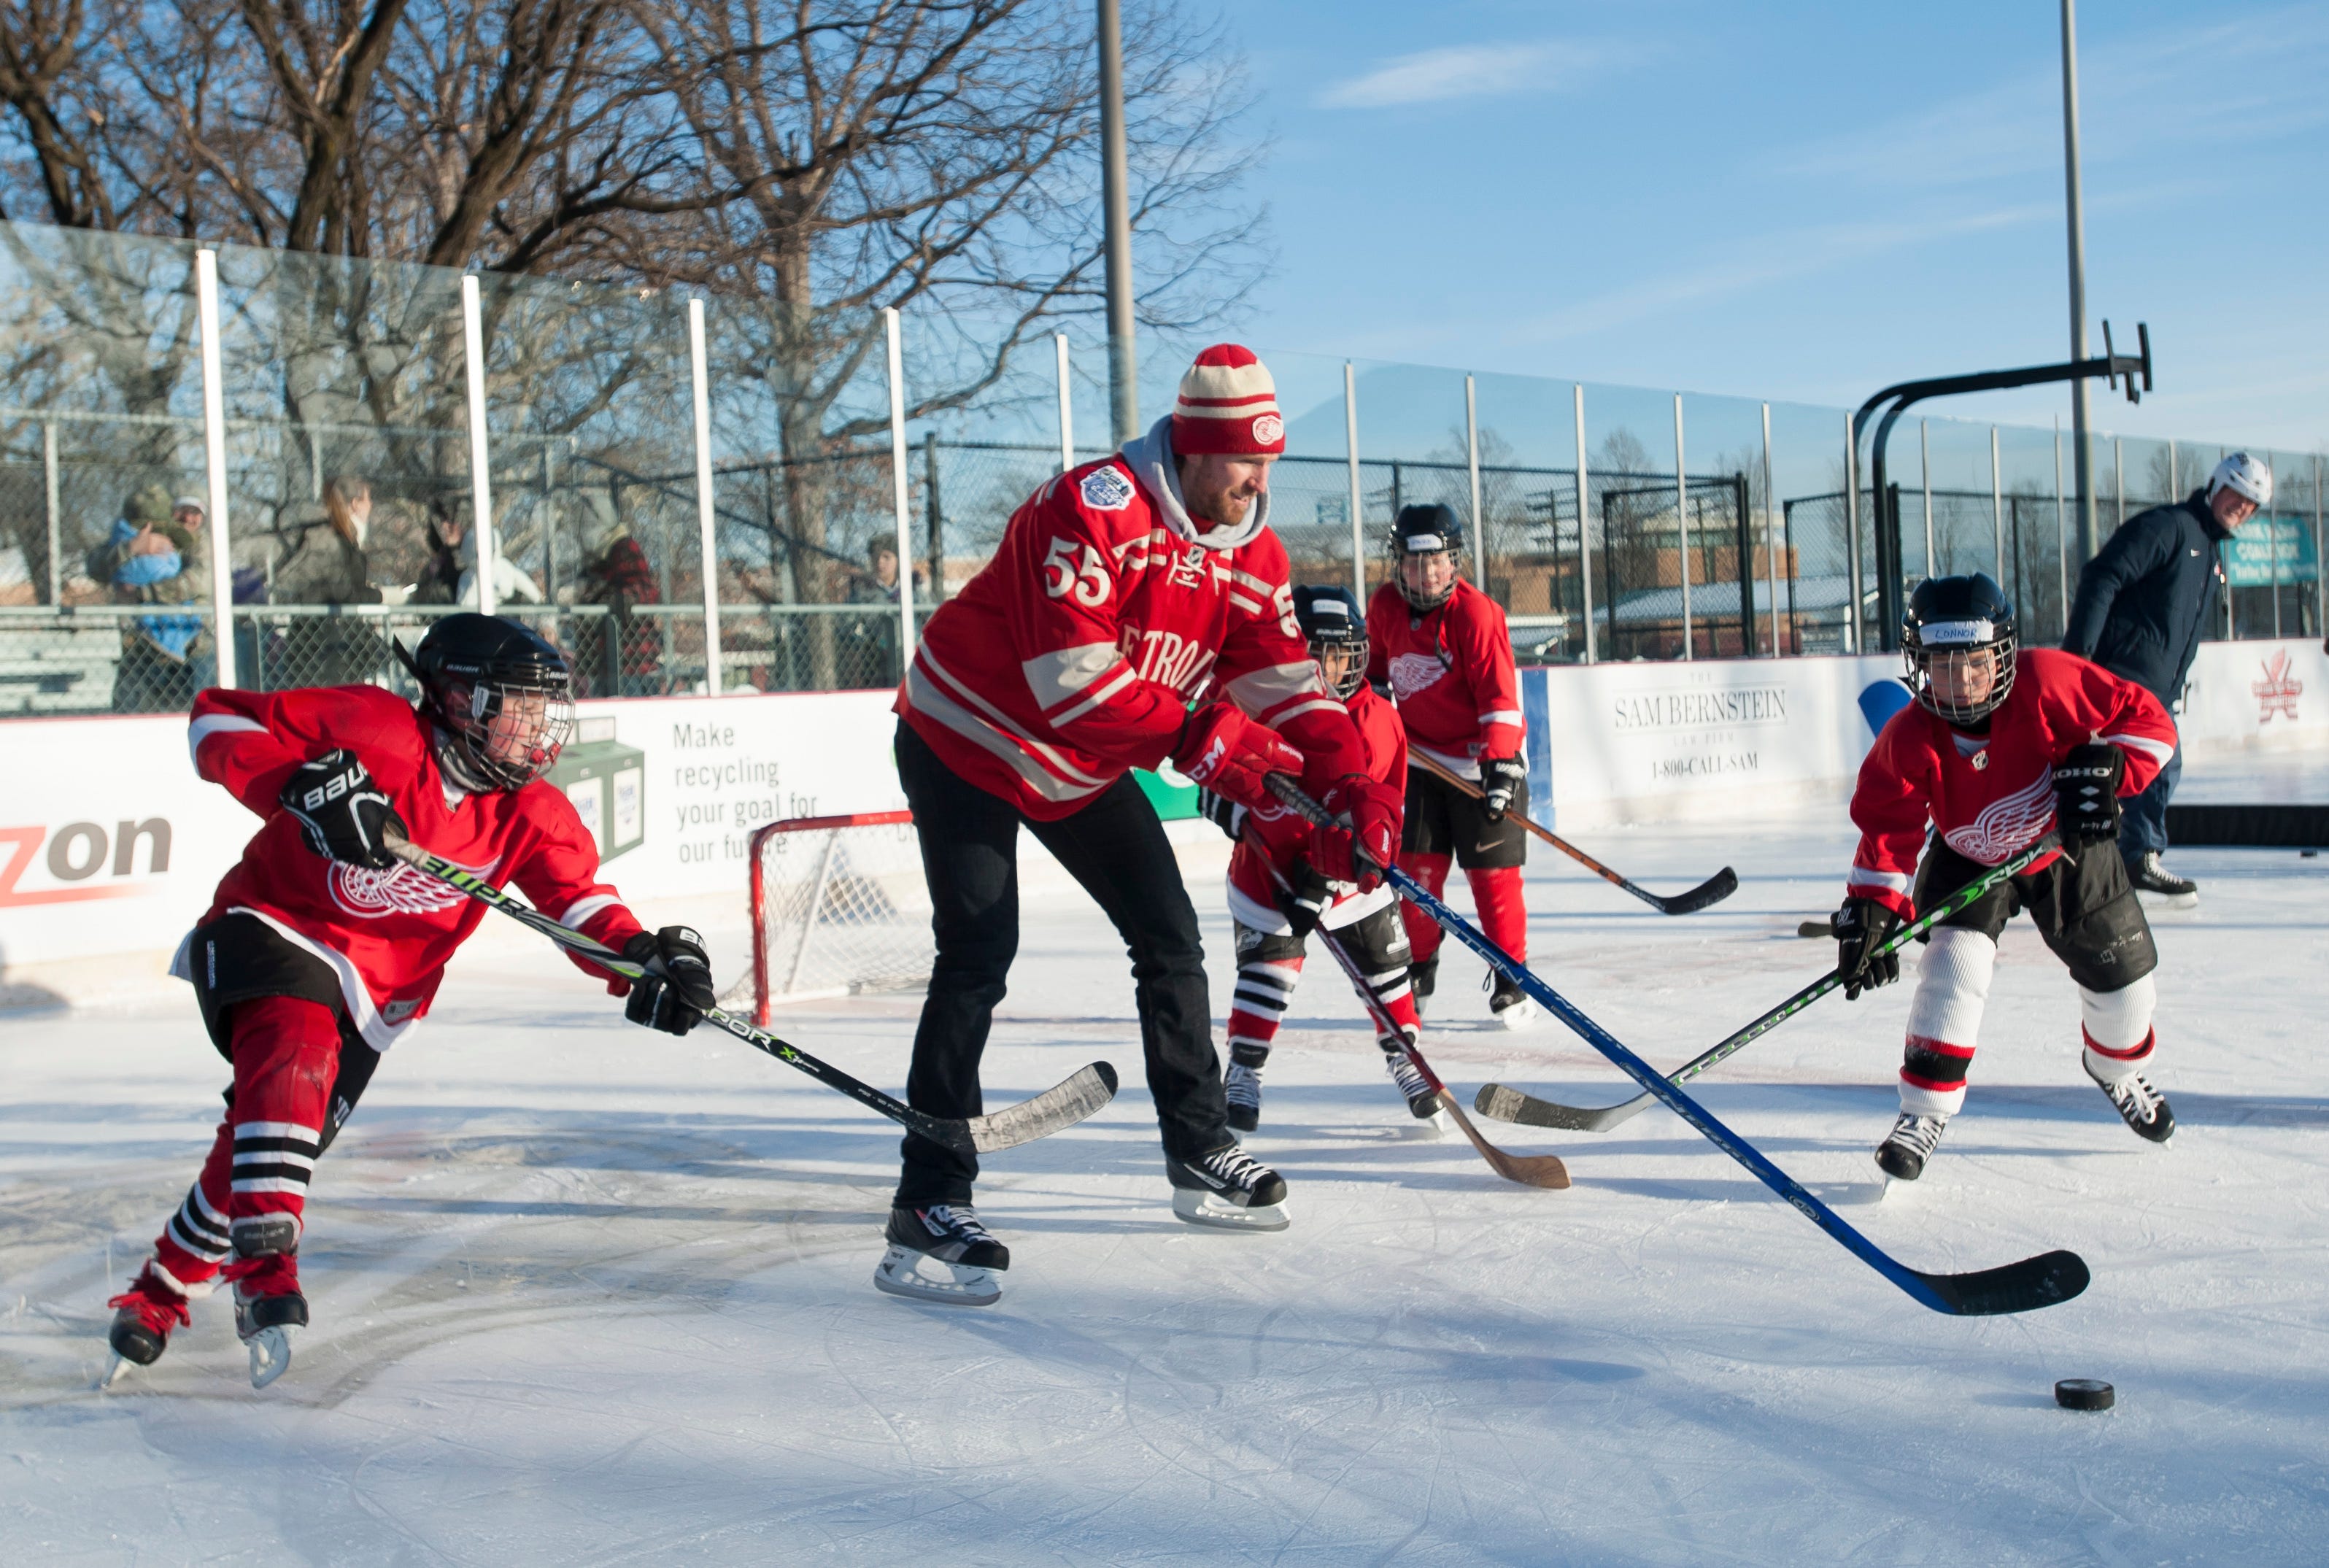 Detroit Red Wings ' Niklas Kronwall puts on a hockey clinic as part of the event. Photos are of an event at Clark Park in Detroit on Dec. 16, 2013.